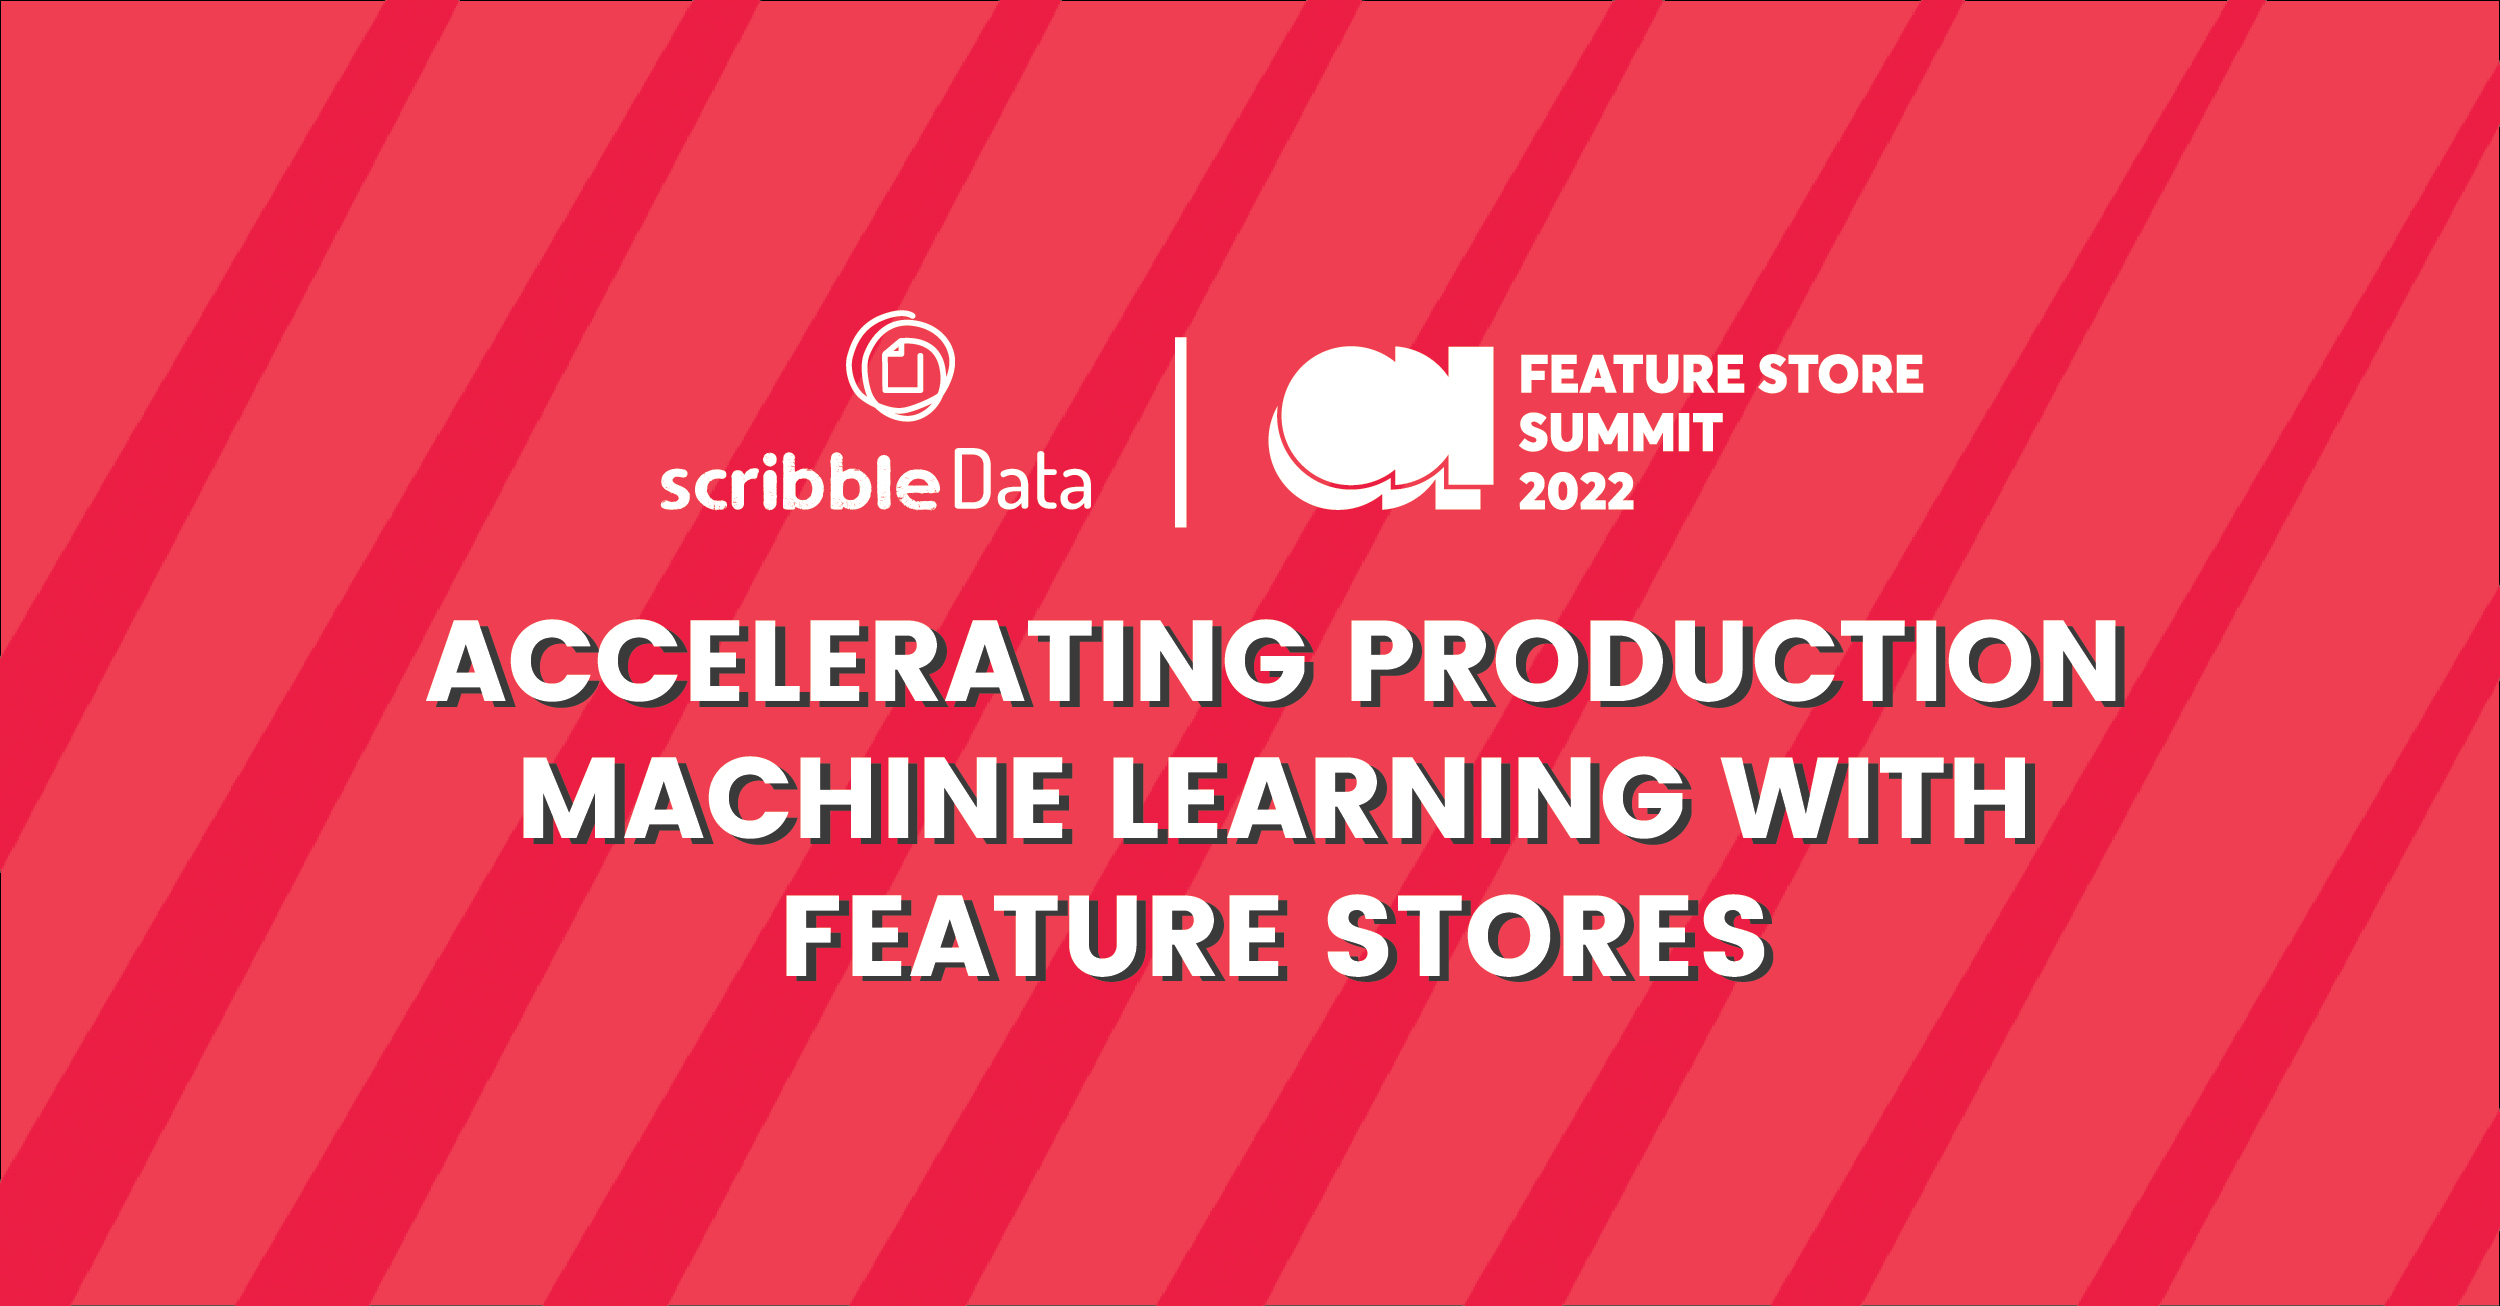 Scribble Data at Feature Store Summit 2022